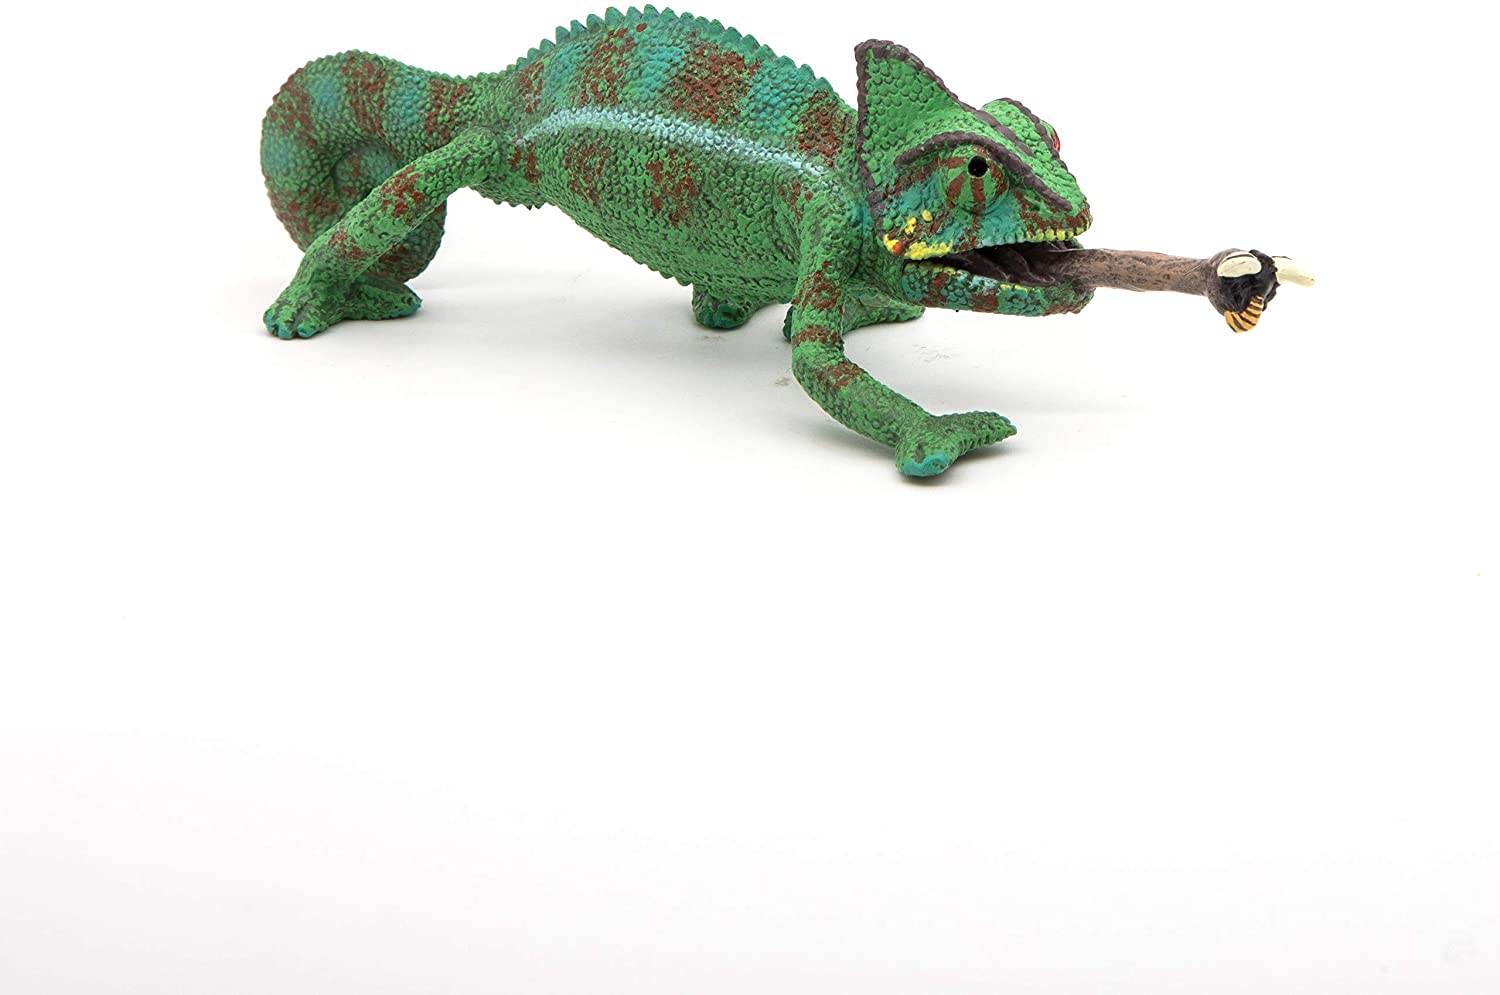 NEW Beautifully Detailed Very Realistic 4" Chameleon PVC Plastic Figure 